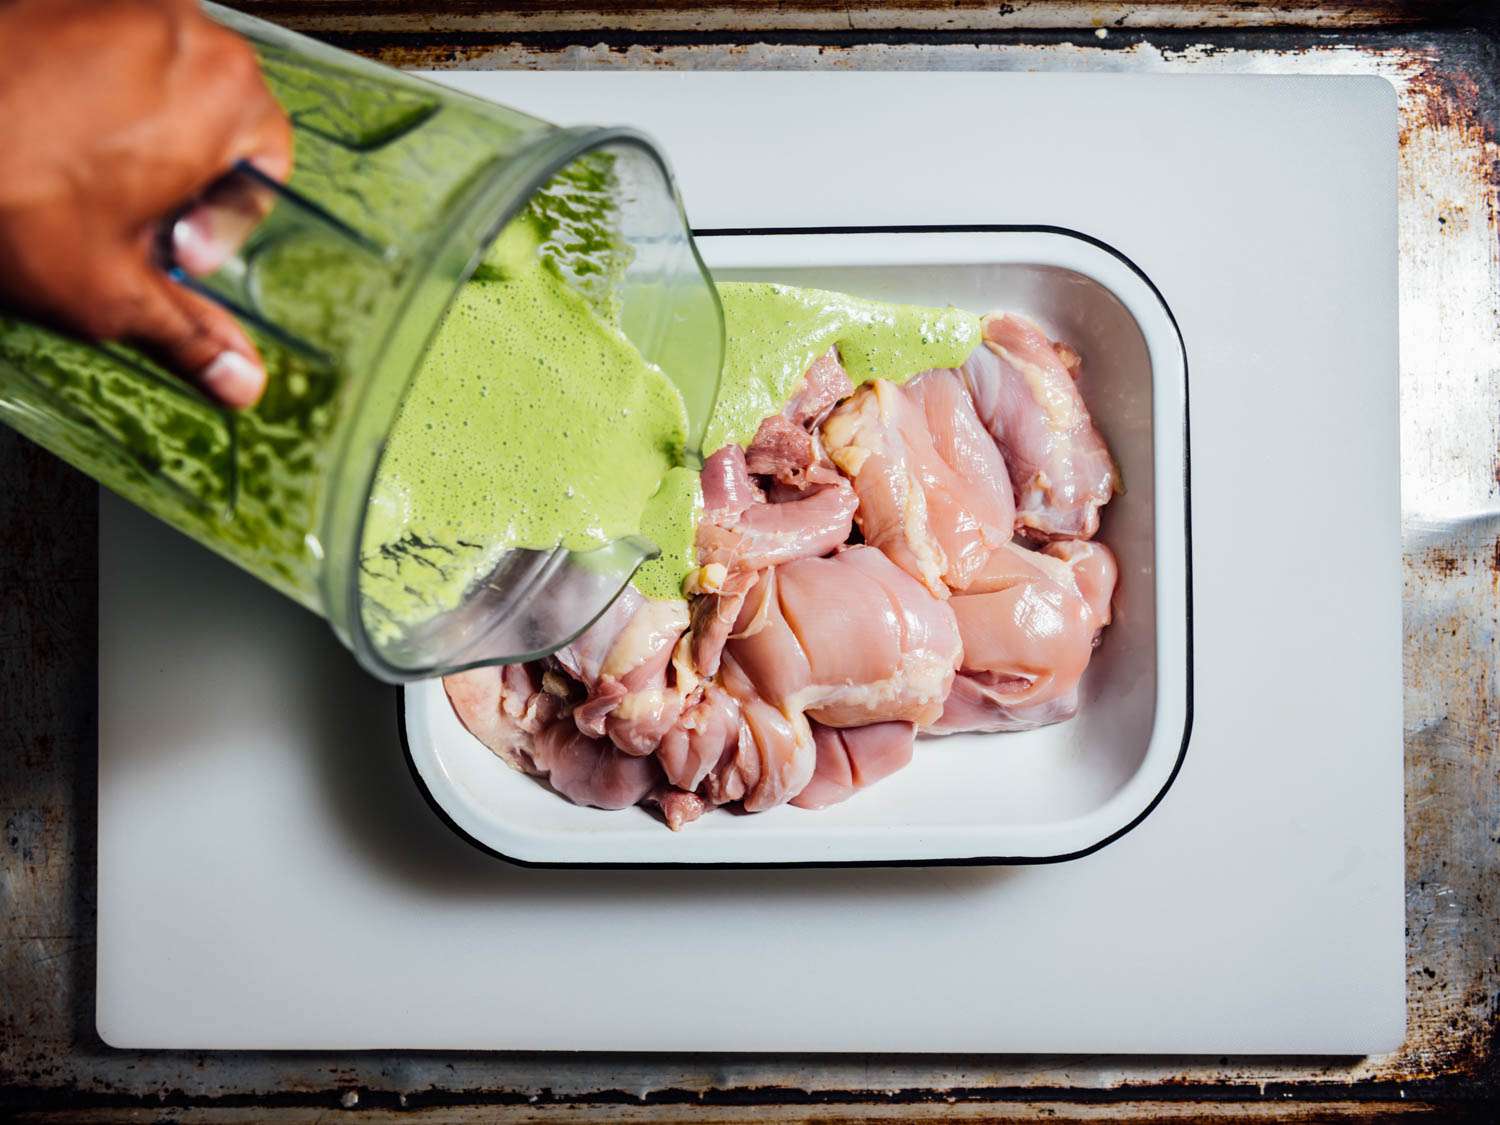 Overhead view of author pouring marinade onto chicken thighs from blender.